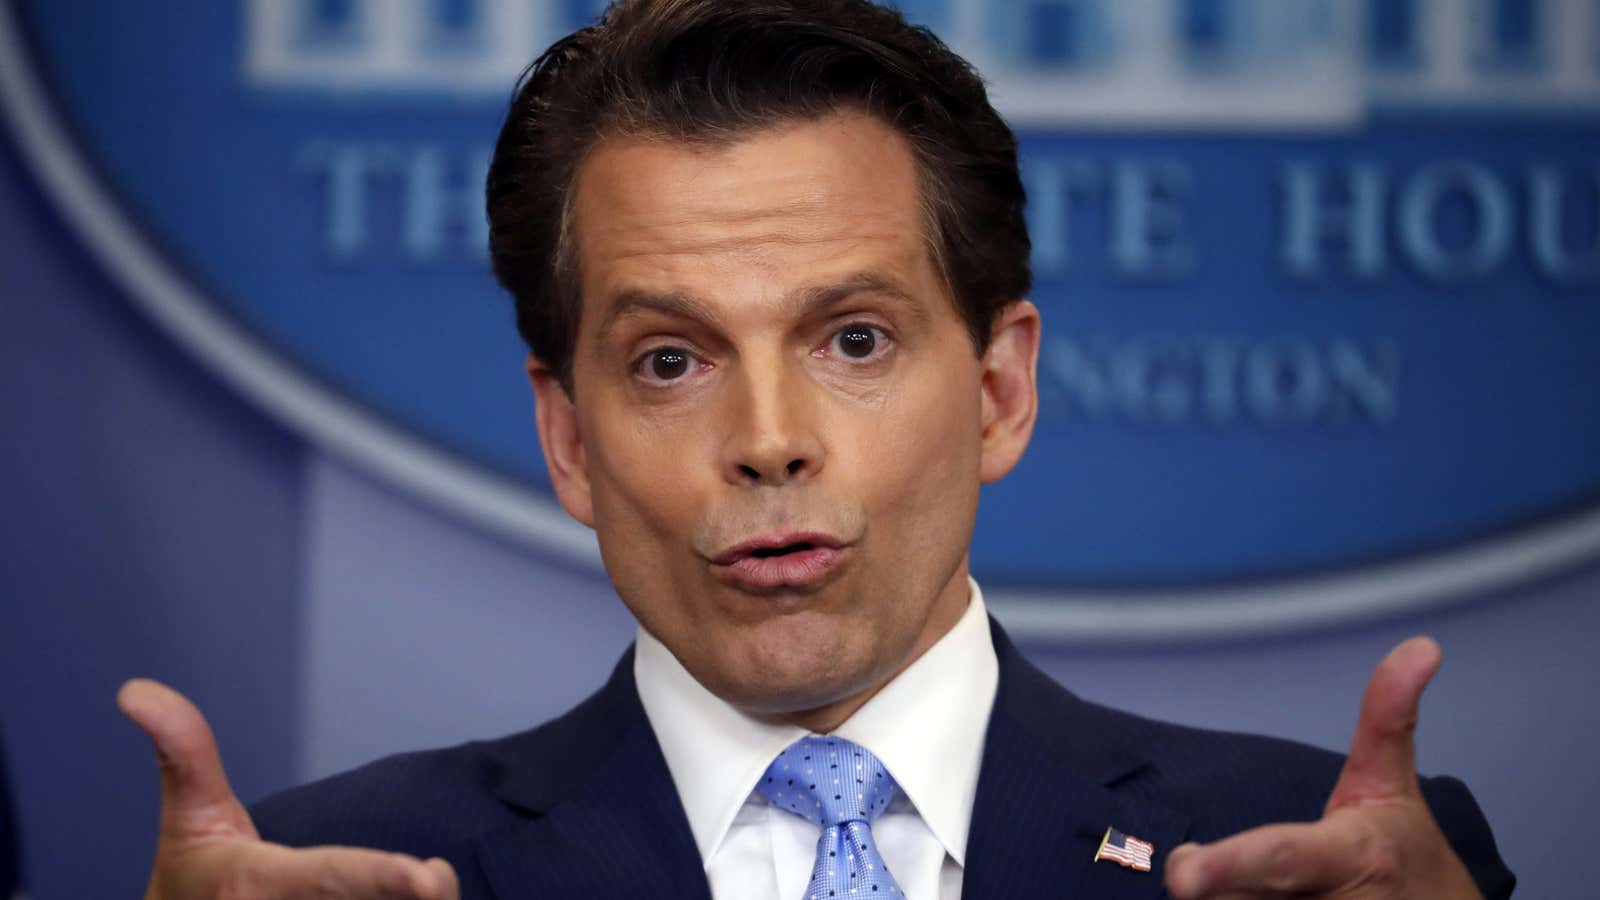 Most bosses don’t get an employee quite like the Mooch.